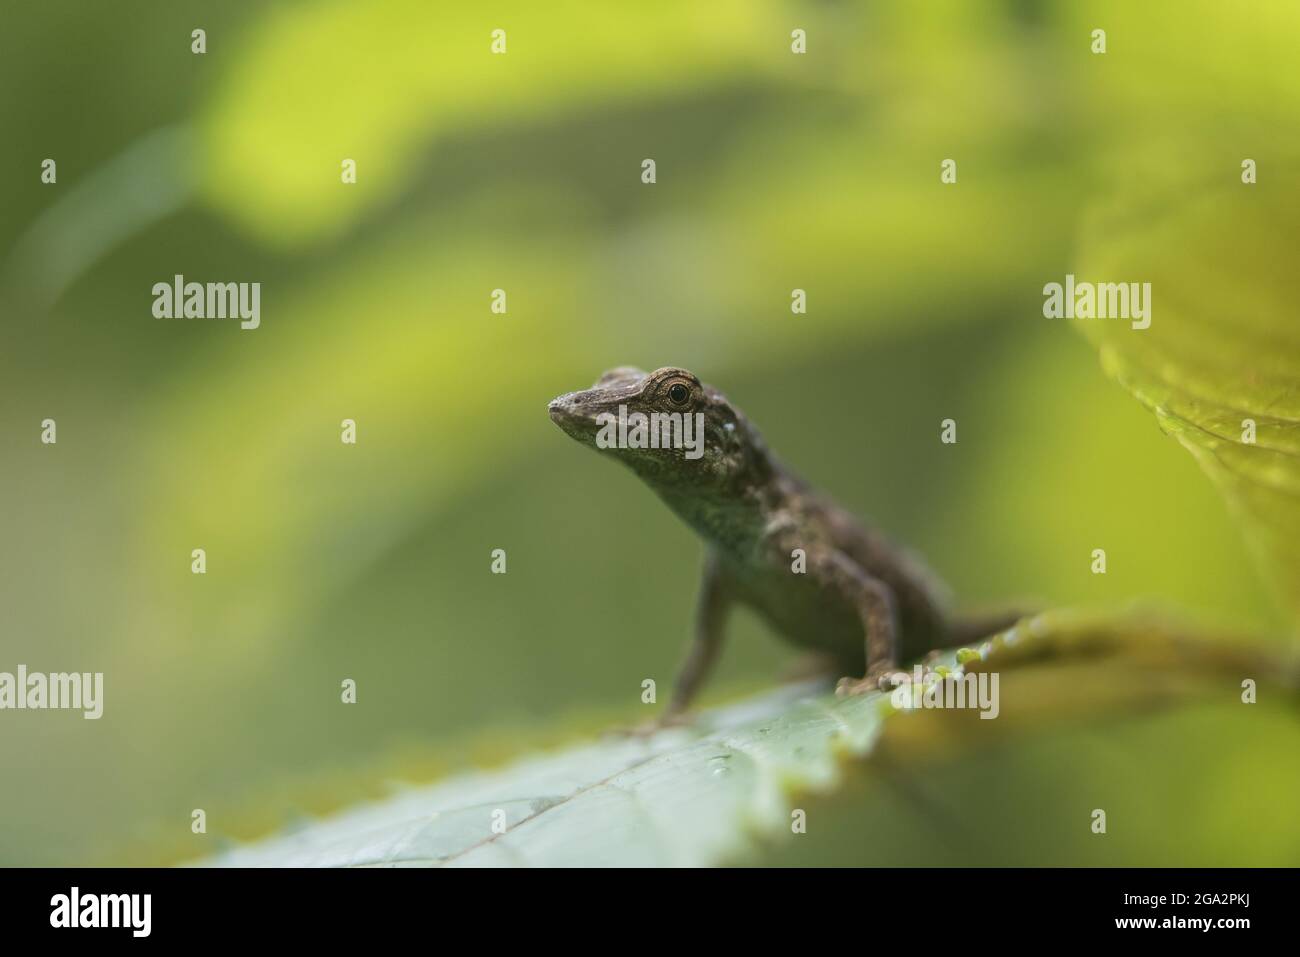 A Slender anole (Anolis fuscoauratus) perches on a leaf in the rainforest; Puntarenas, Costa Rica Stock Photo